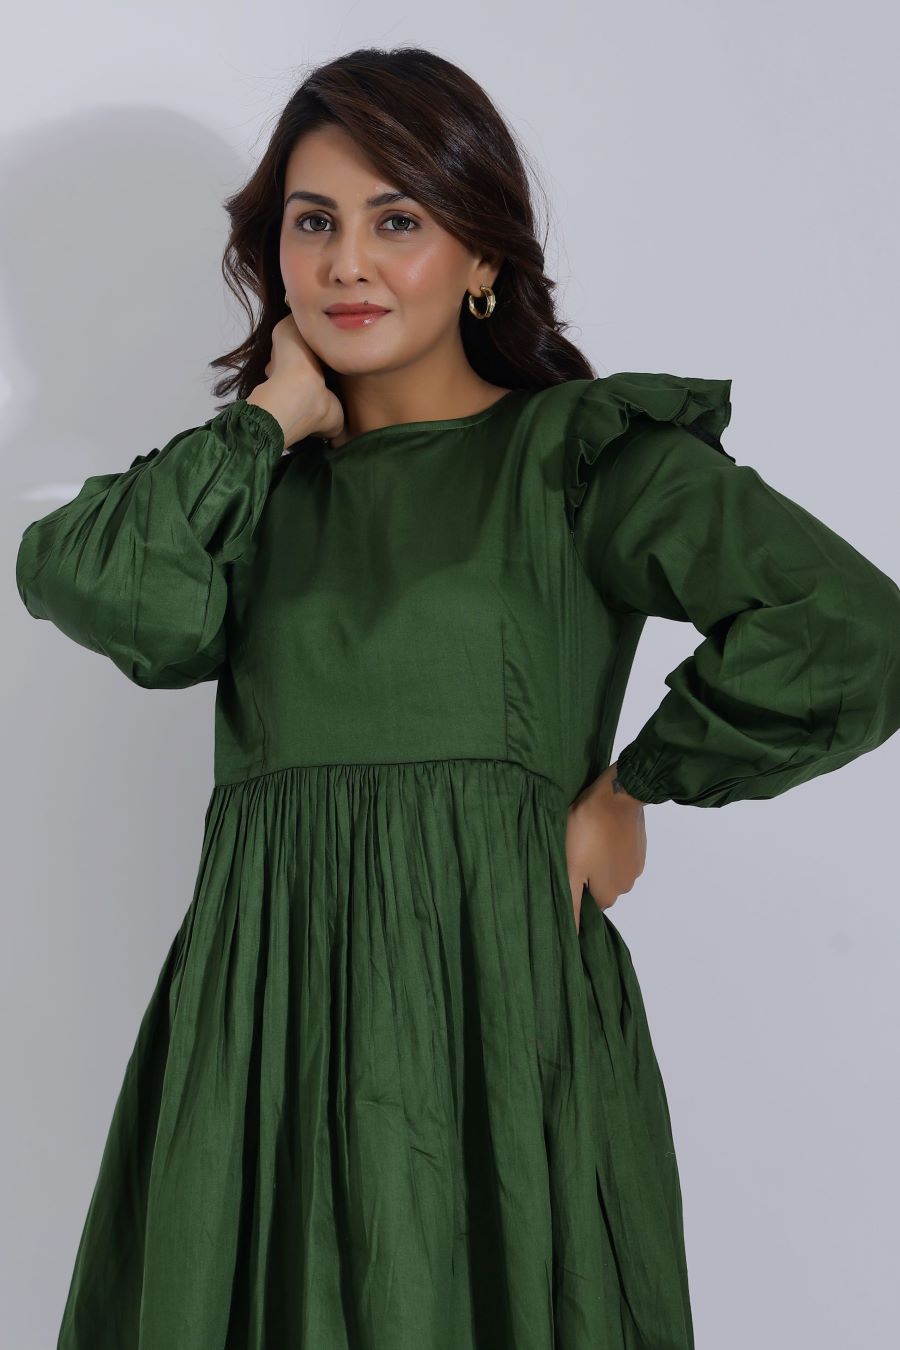 Dark Green Dress With Sleeves For Women closeup 1